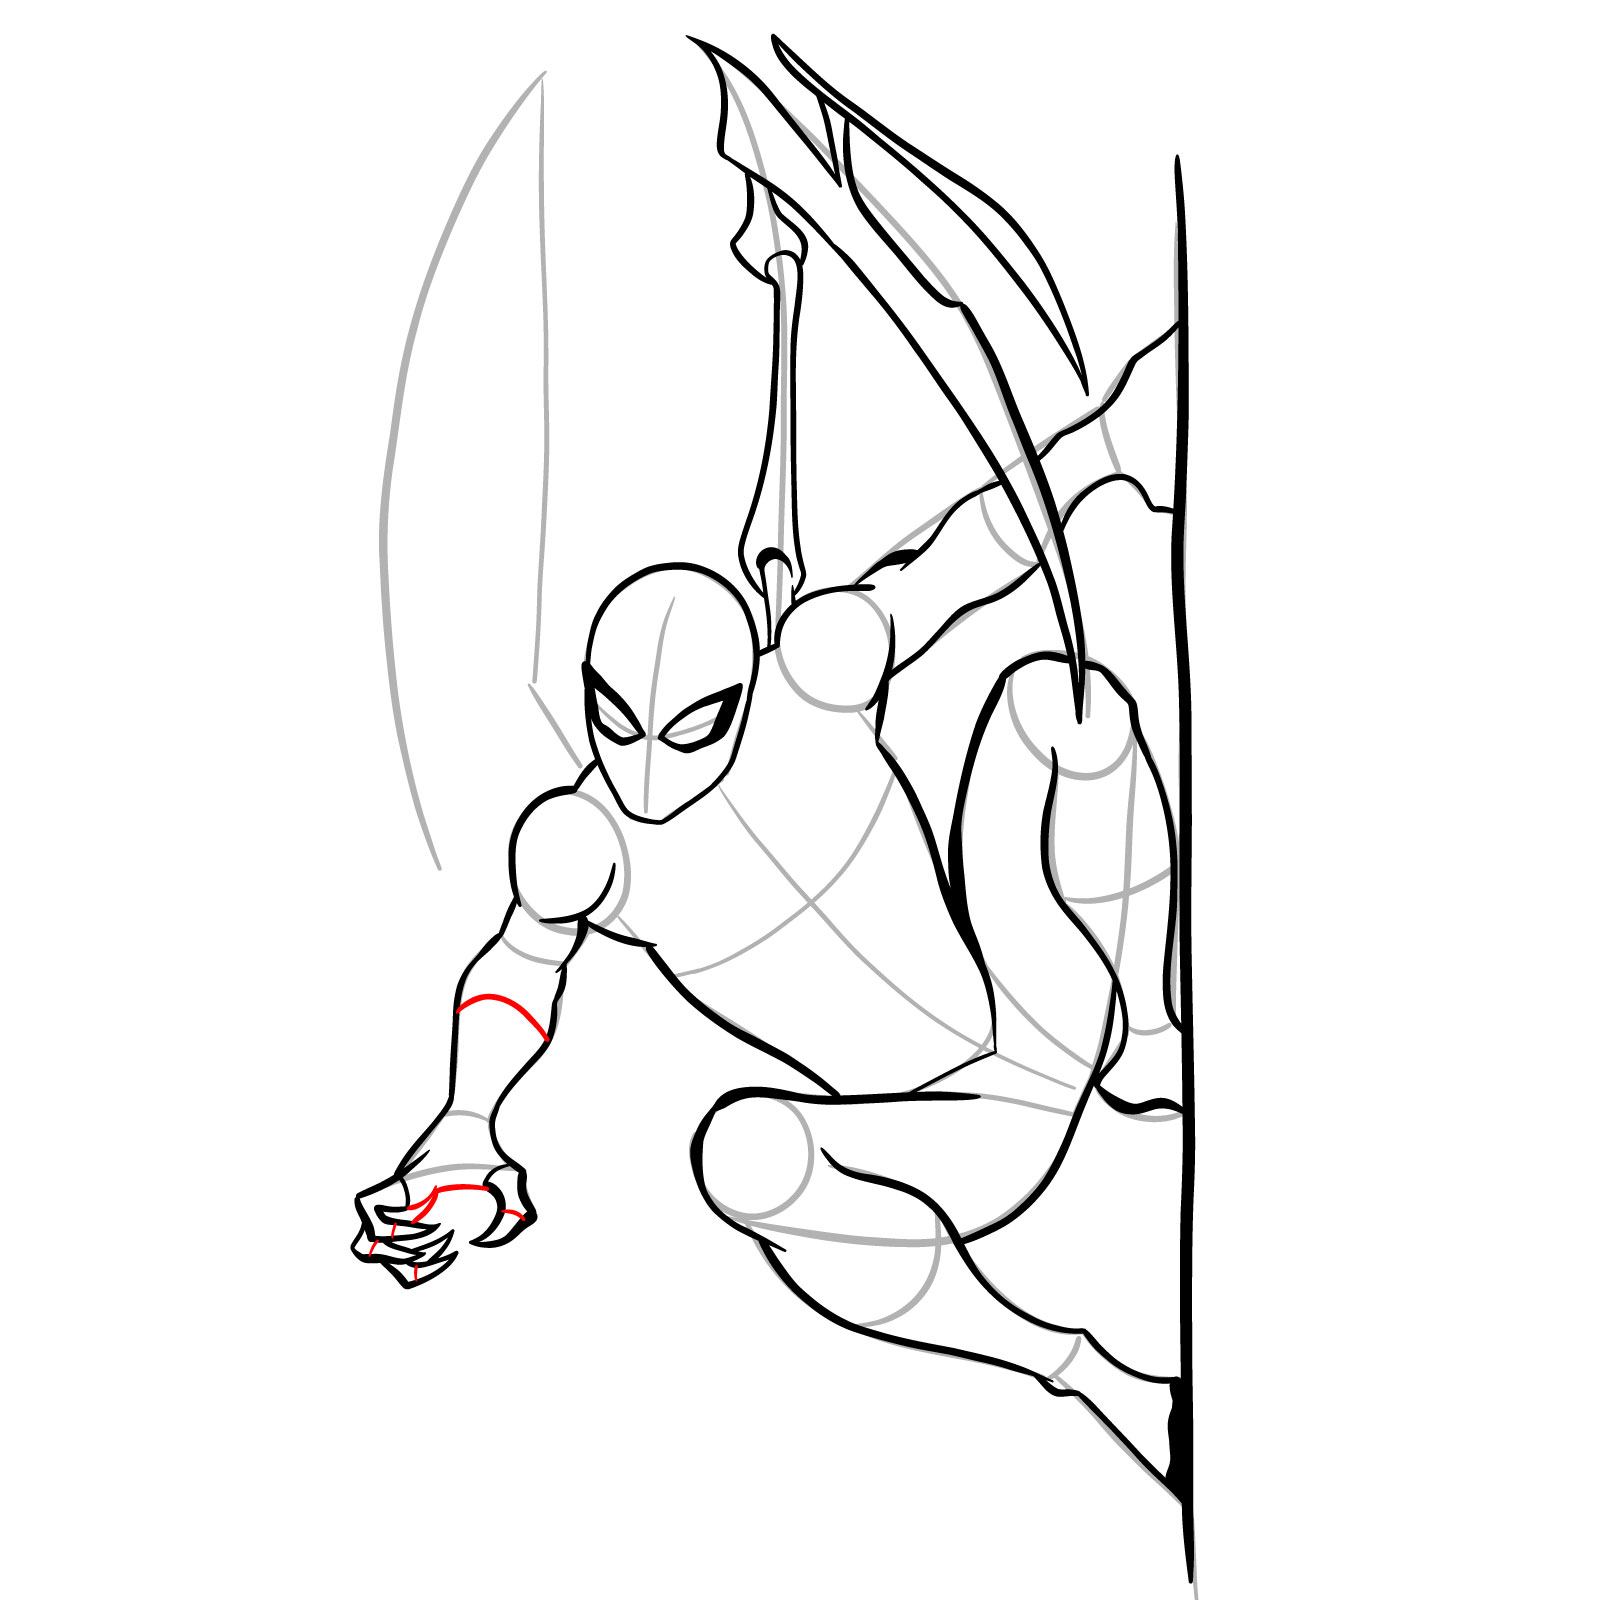 How to draw The Superior Spider-Man - step 26